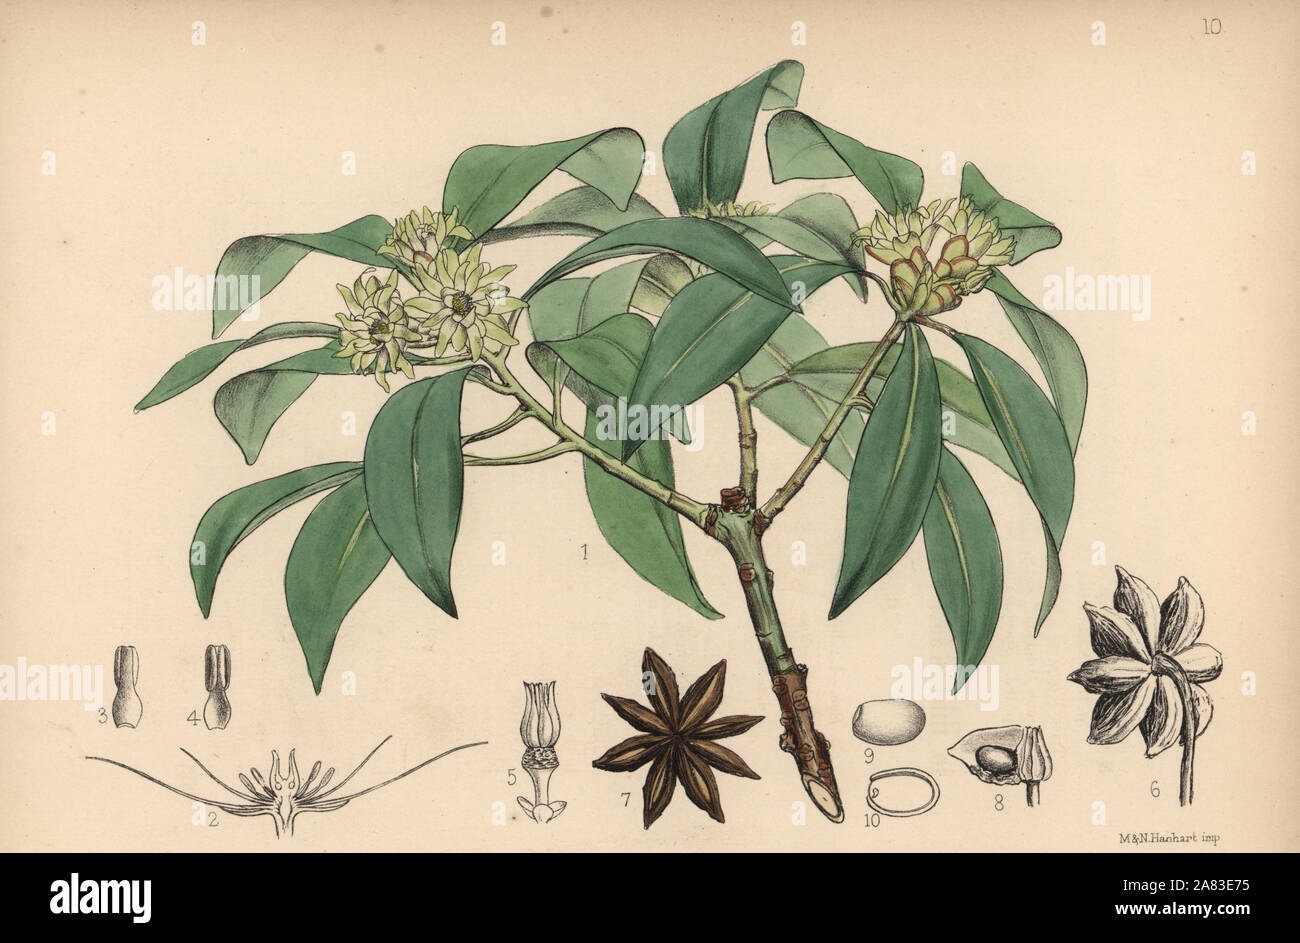 Japanese star anise or shikimi, Illicium anisatum. Handcoloured lithograph by Hanhart after a botanical illustration by David Blair from Robert Bentley and Henry Trimen's Medicinal Plants, London, 1880. Stock Photo